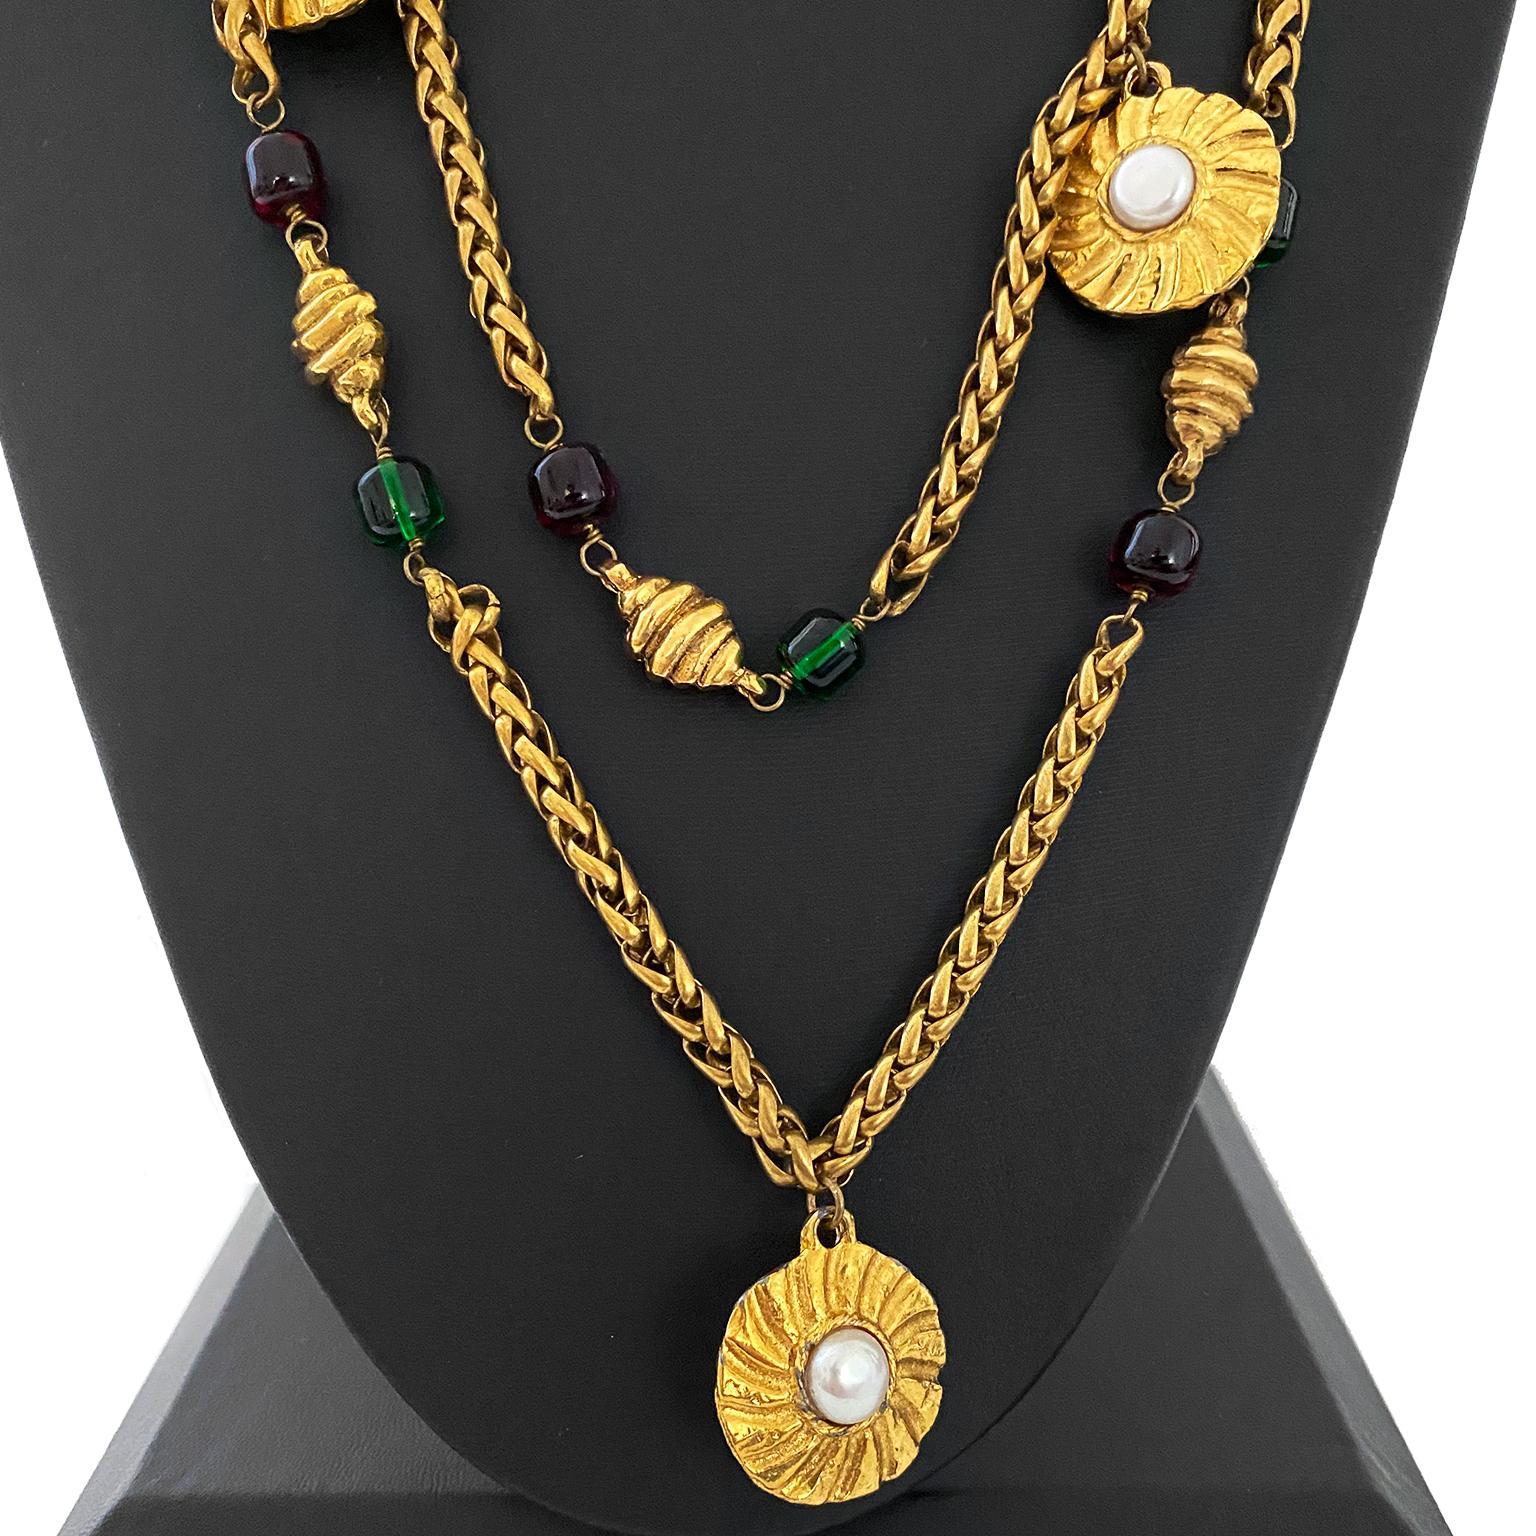 Spectacular, luxurious, heavy weighted Chanel necklace from 1984. Gold tone palma chain embellished with large round gilded metal articulated discs and faux pearl centers, little croissant shaped gold charms link with maroon and green poured glass